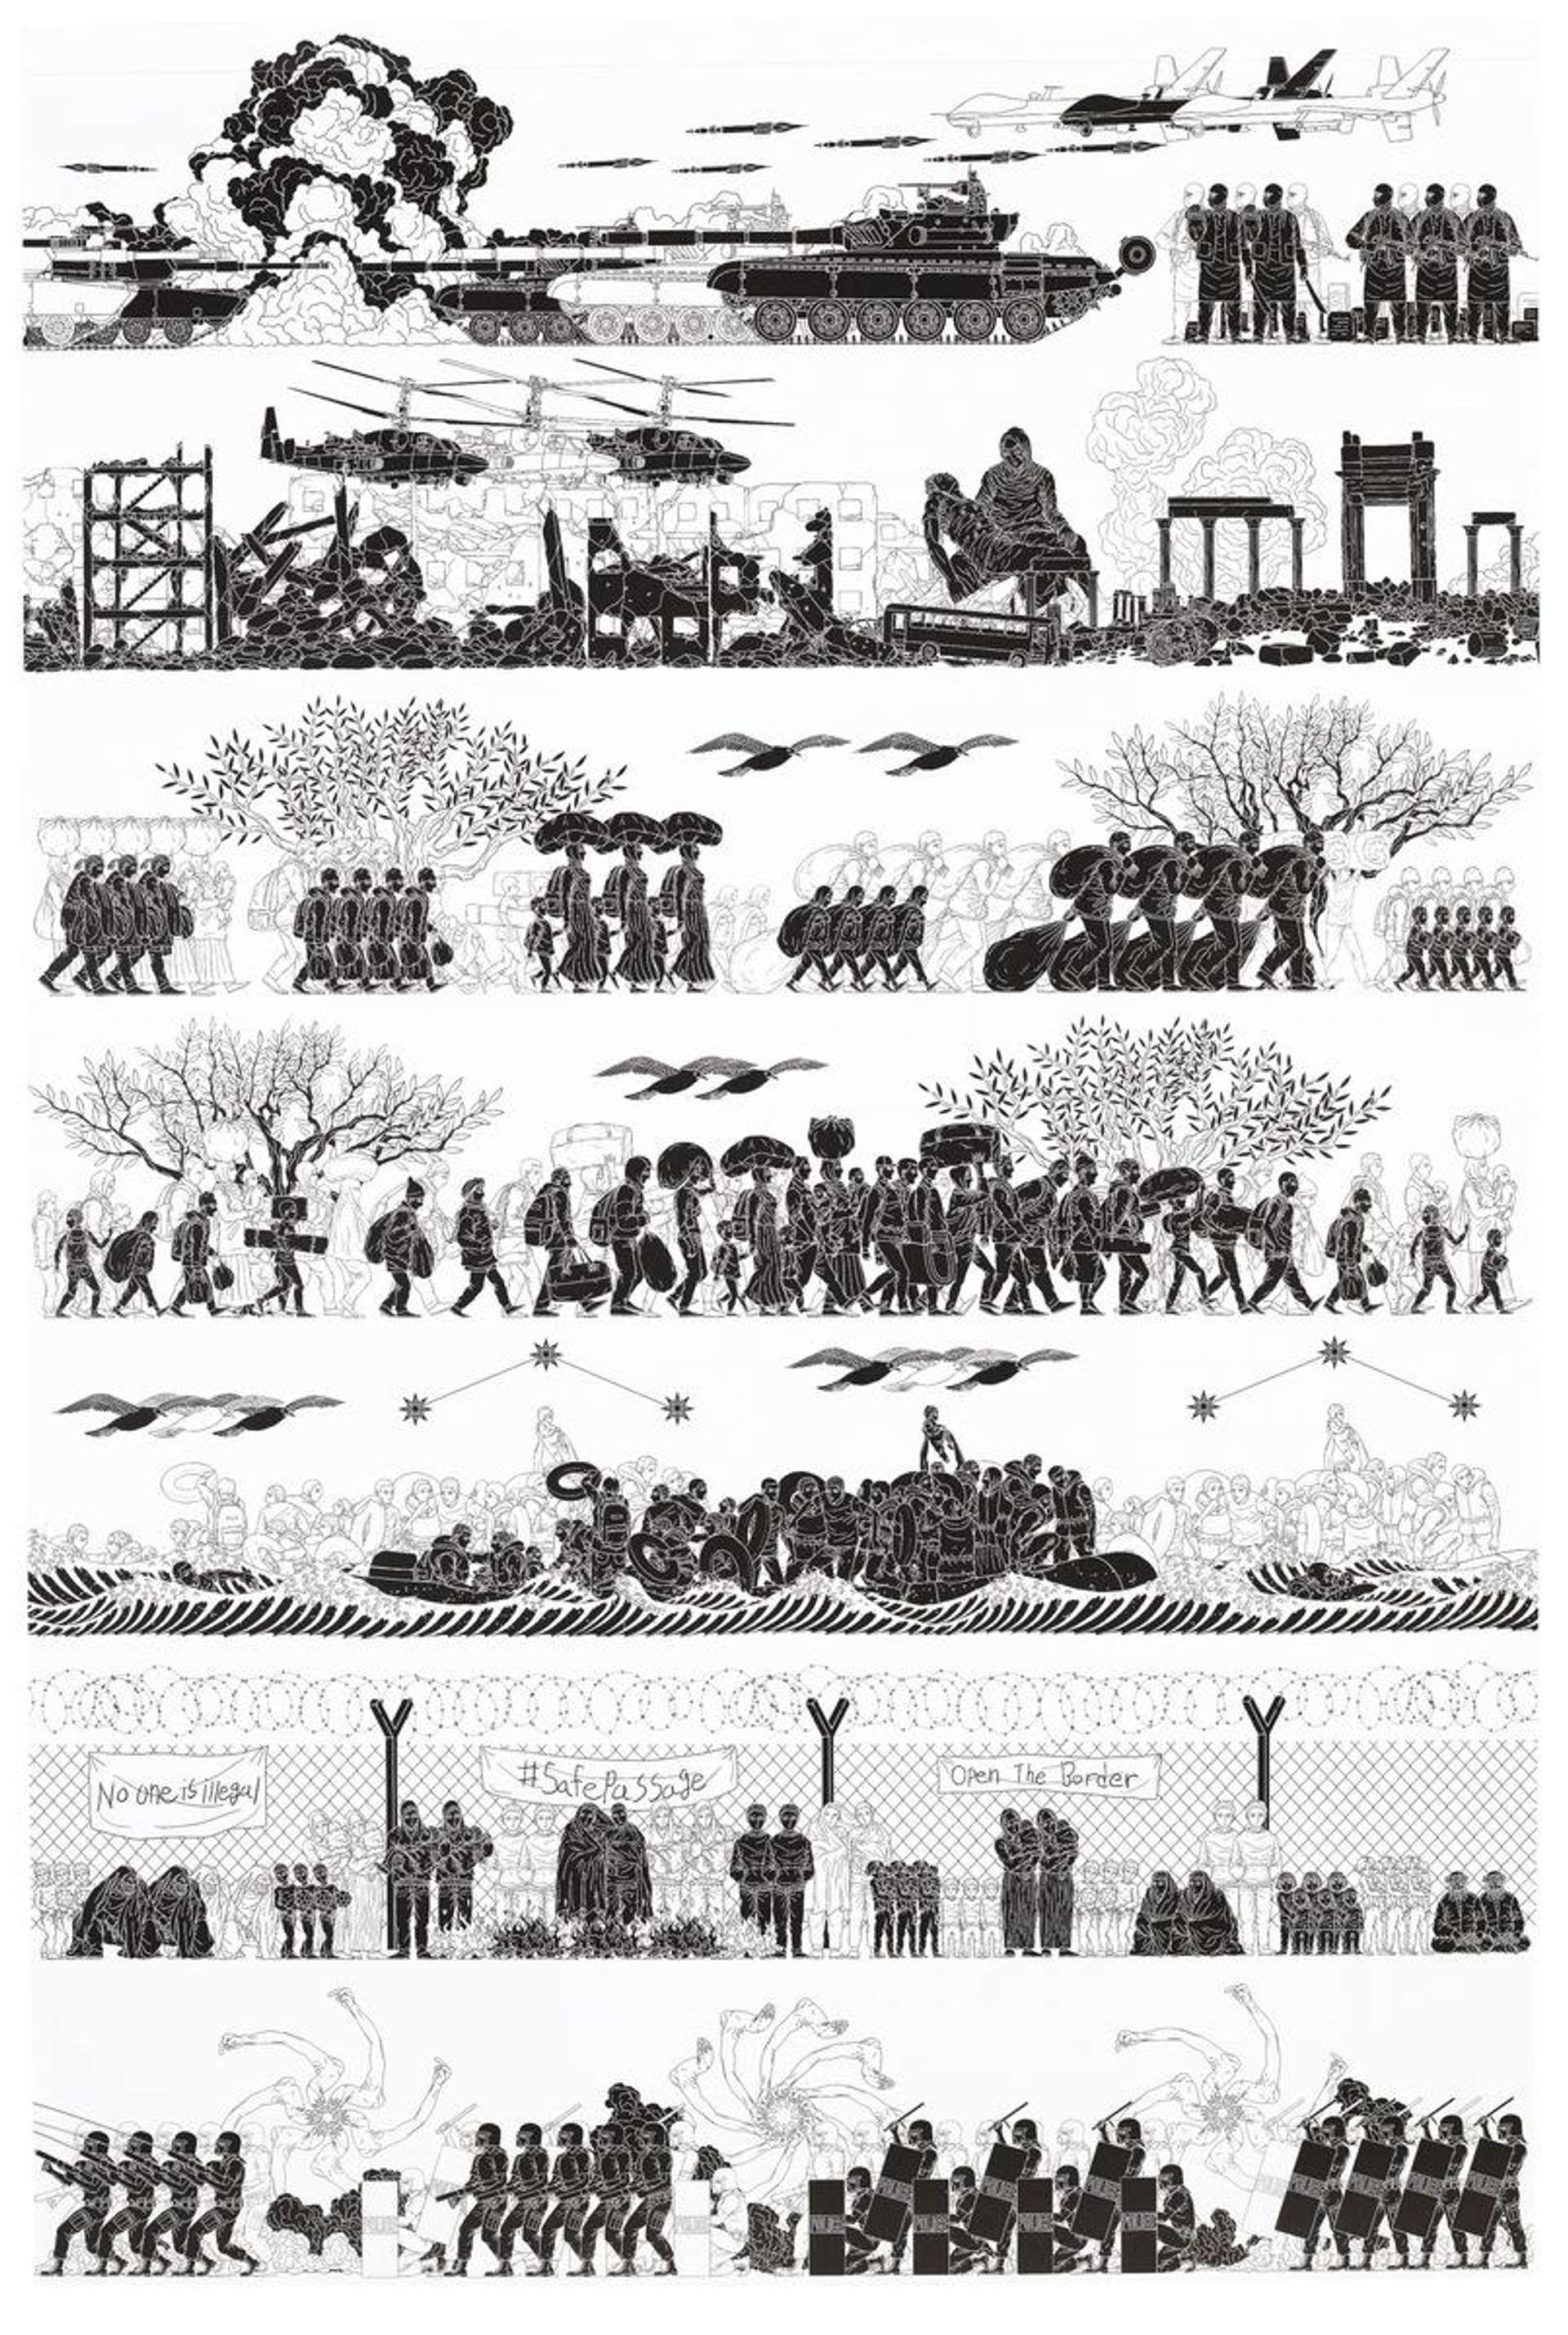 Odyssey by Ai Weiwei (2017). A black and white print with seven frieze-style scenes of war.